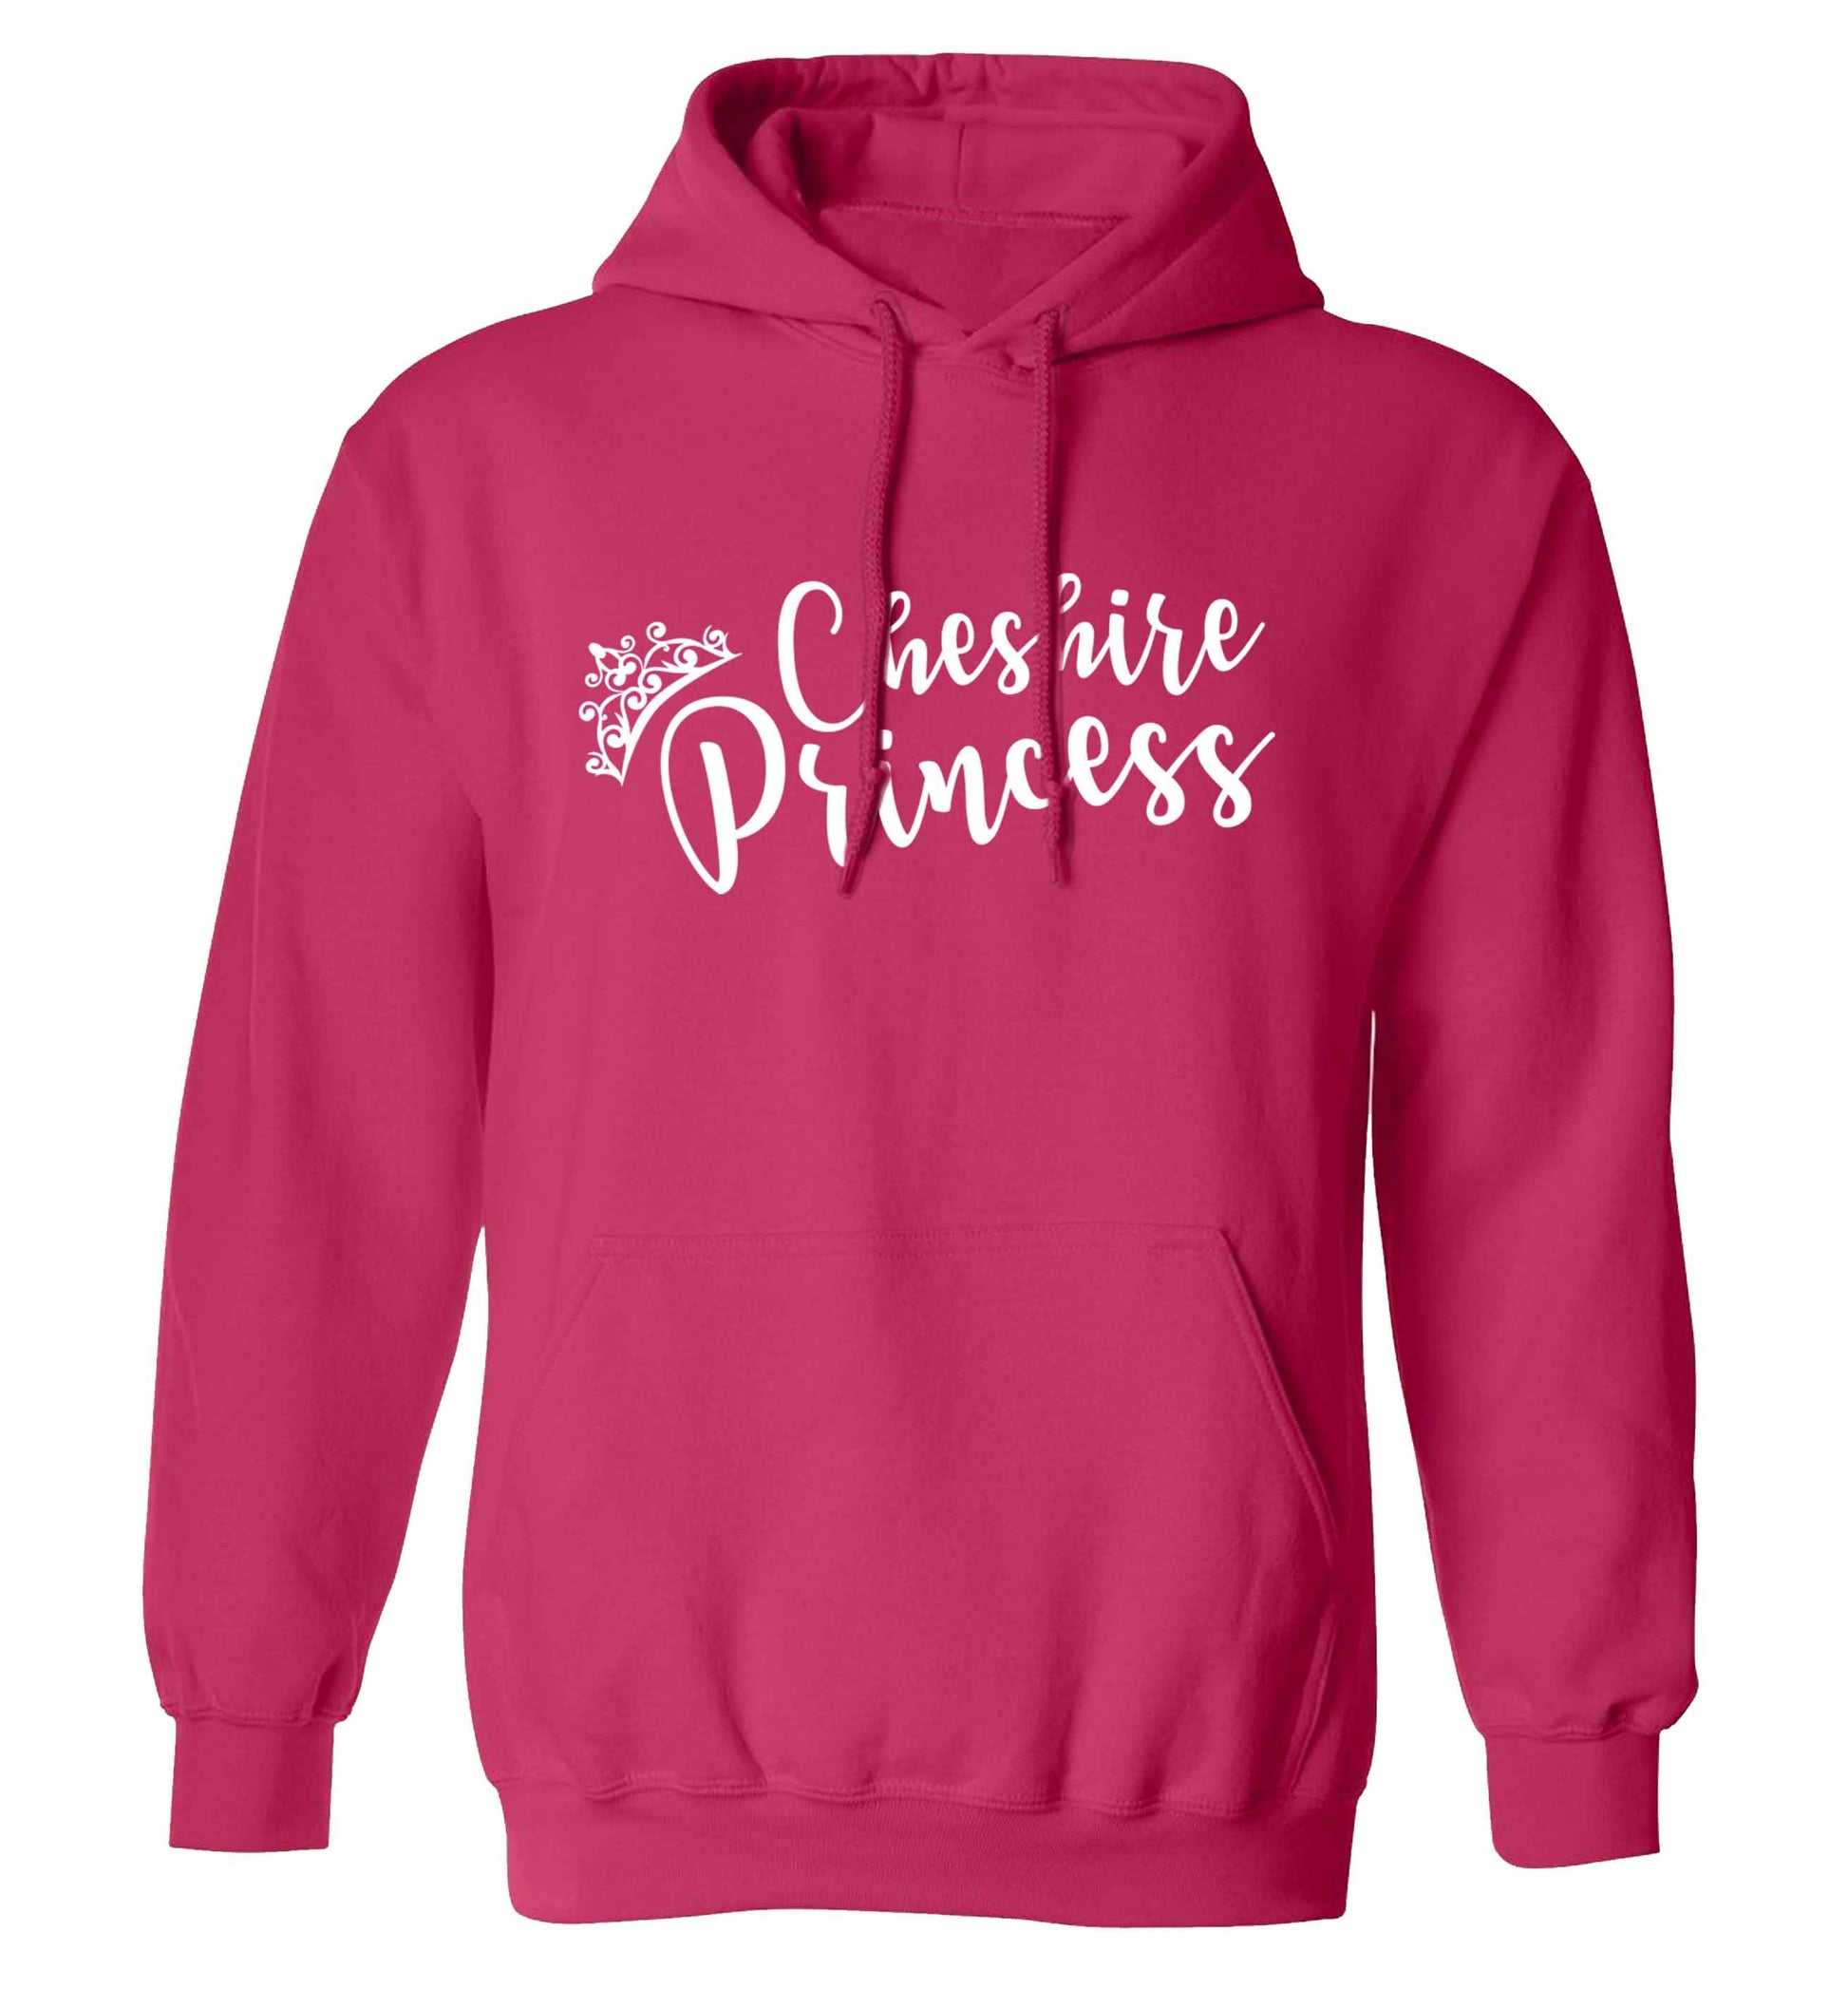 Cheshire princess adults unisex pink hoodie 2XL